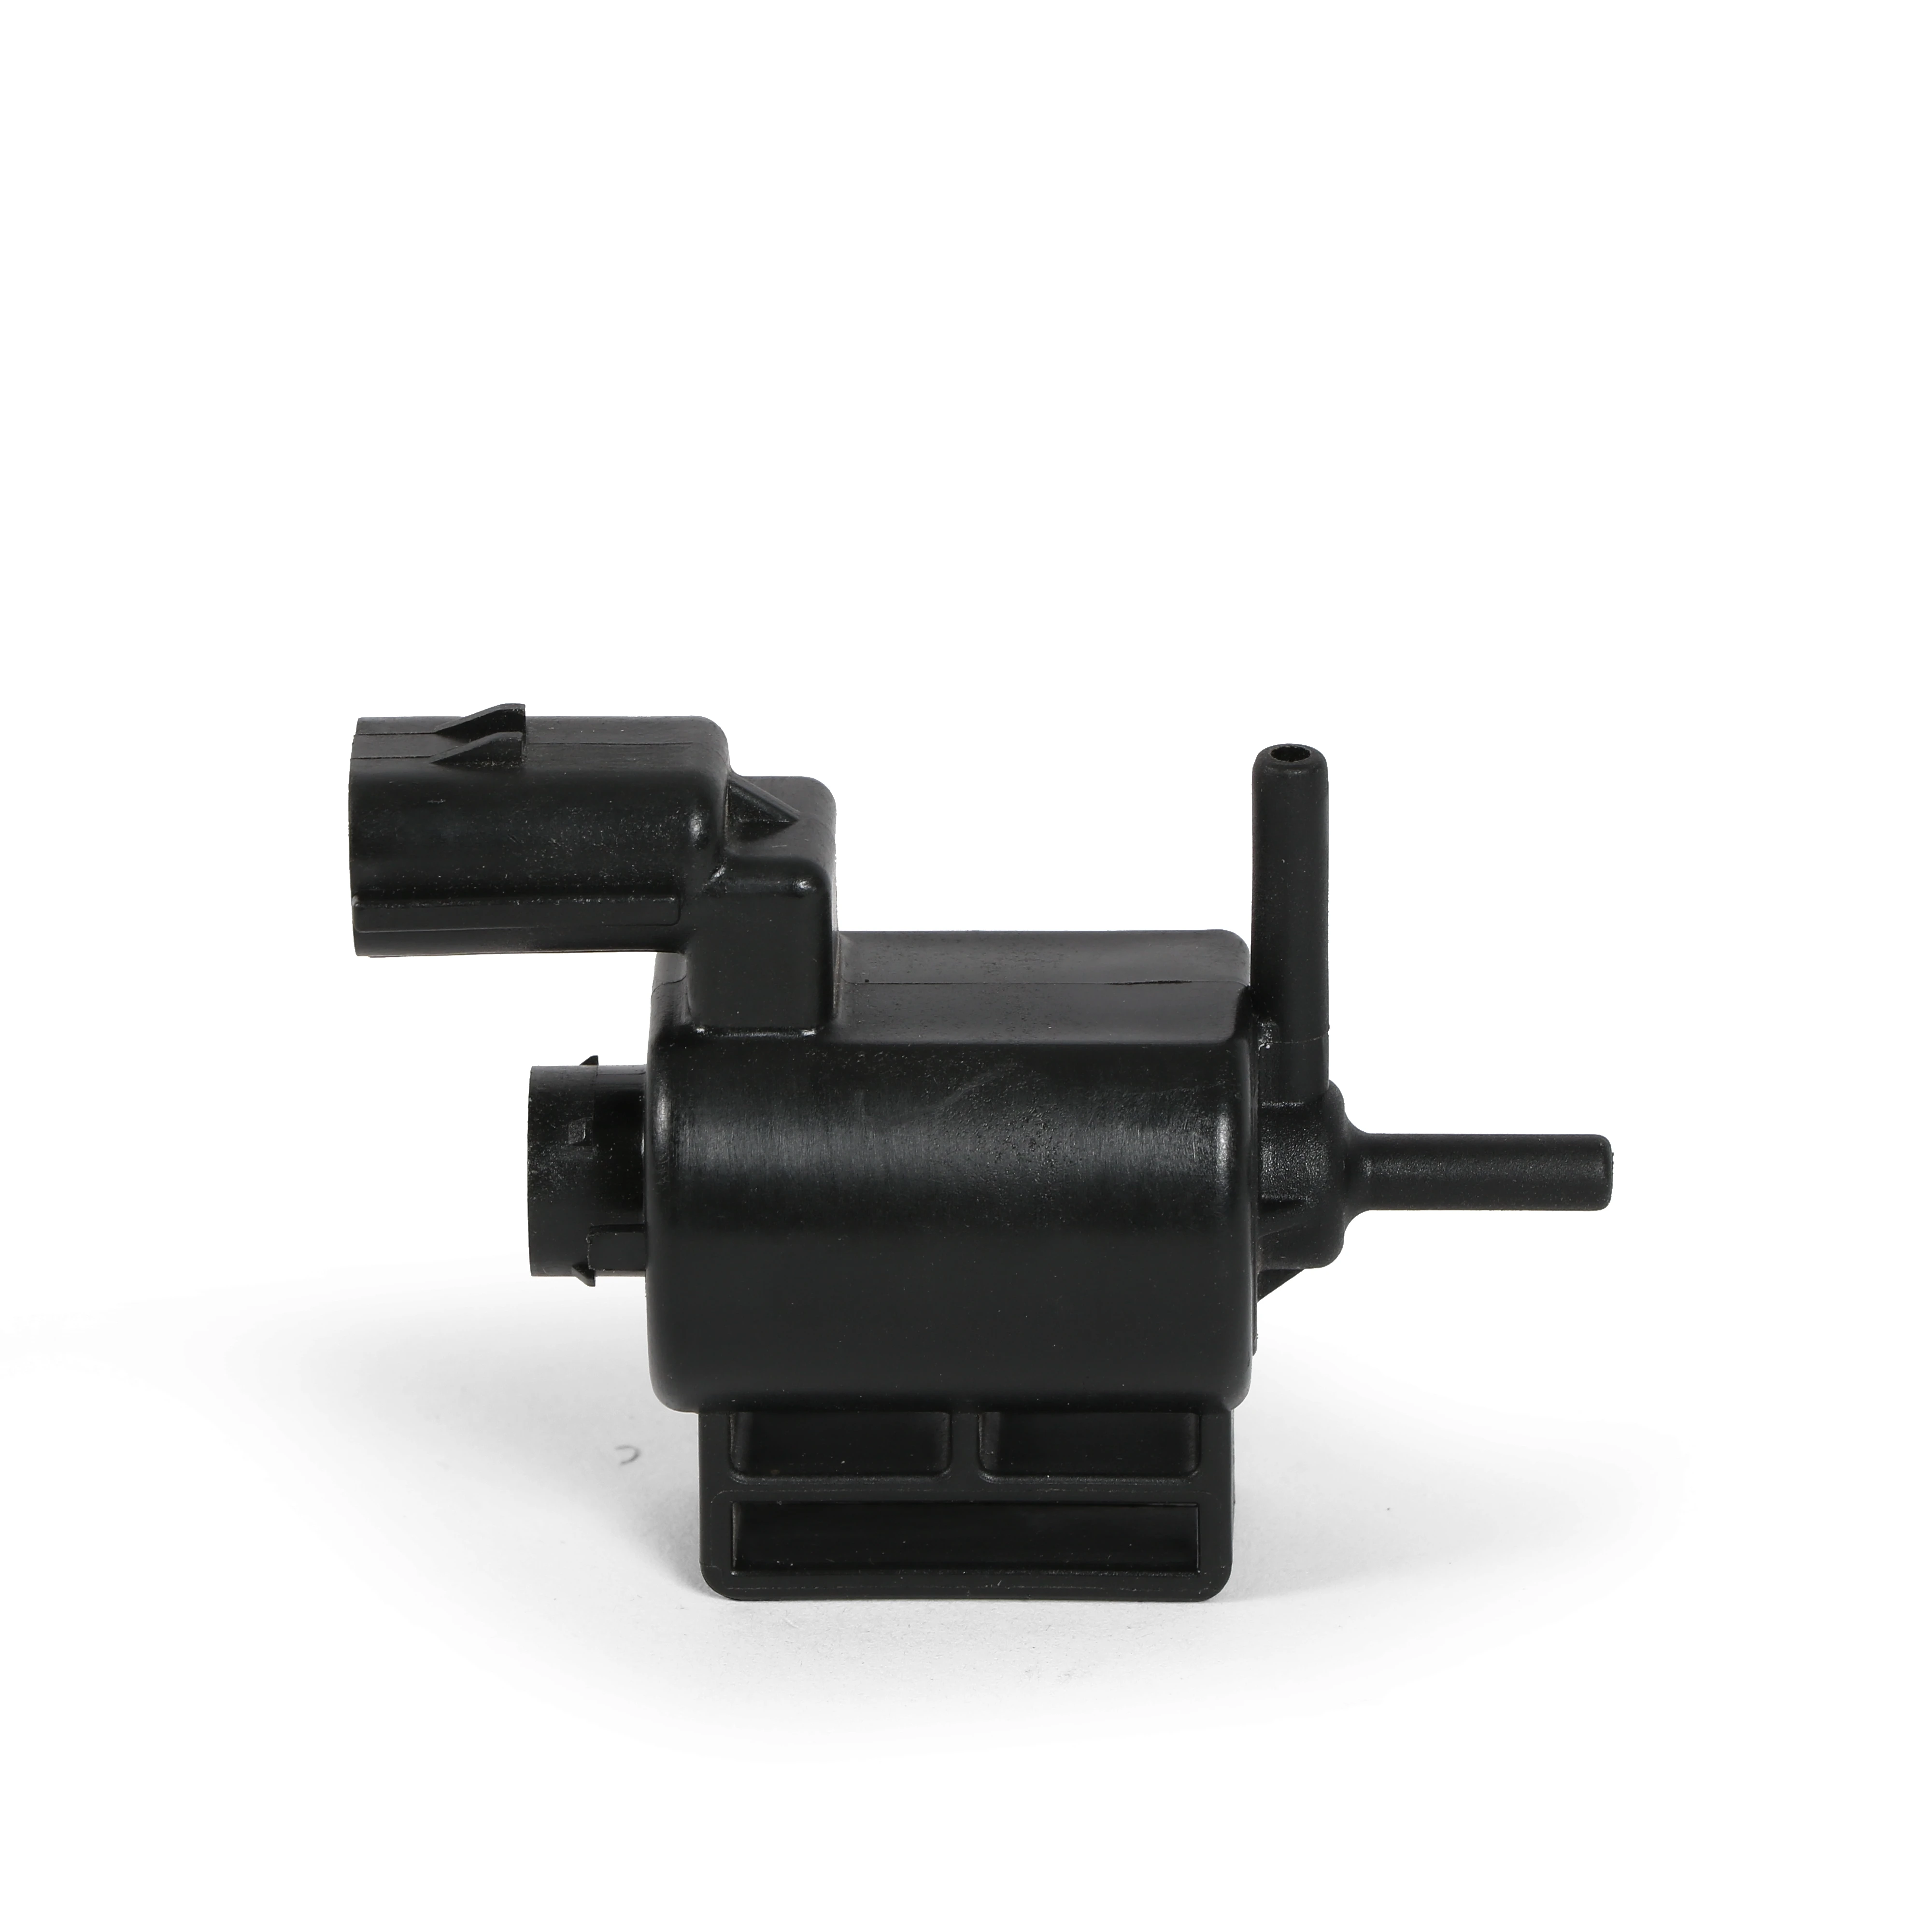 High precision valve made by plastic insert injection molding process with metal insert for car